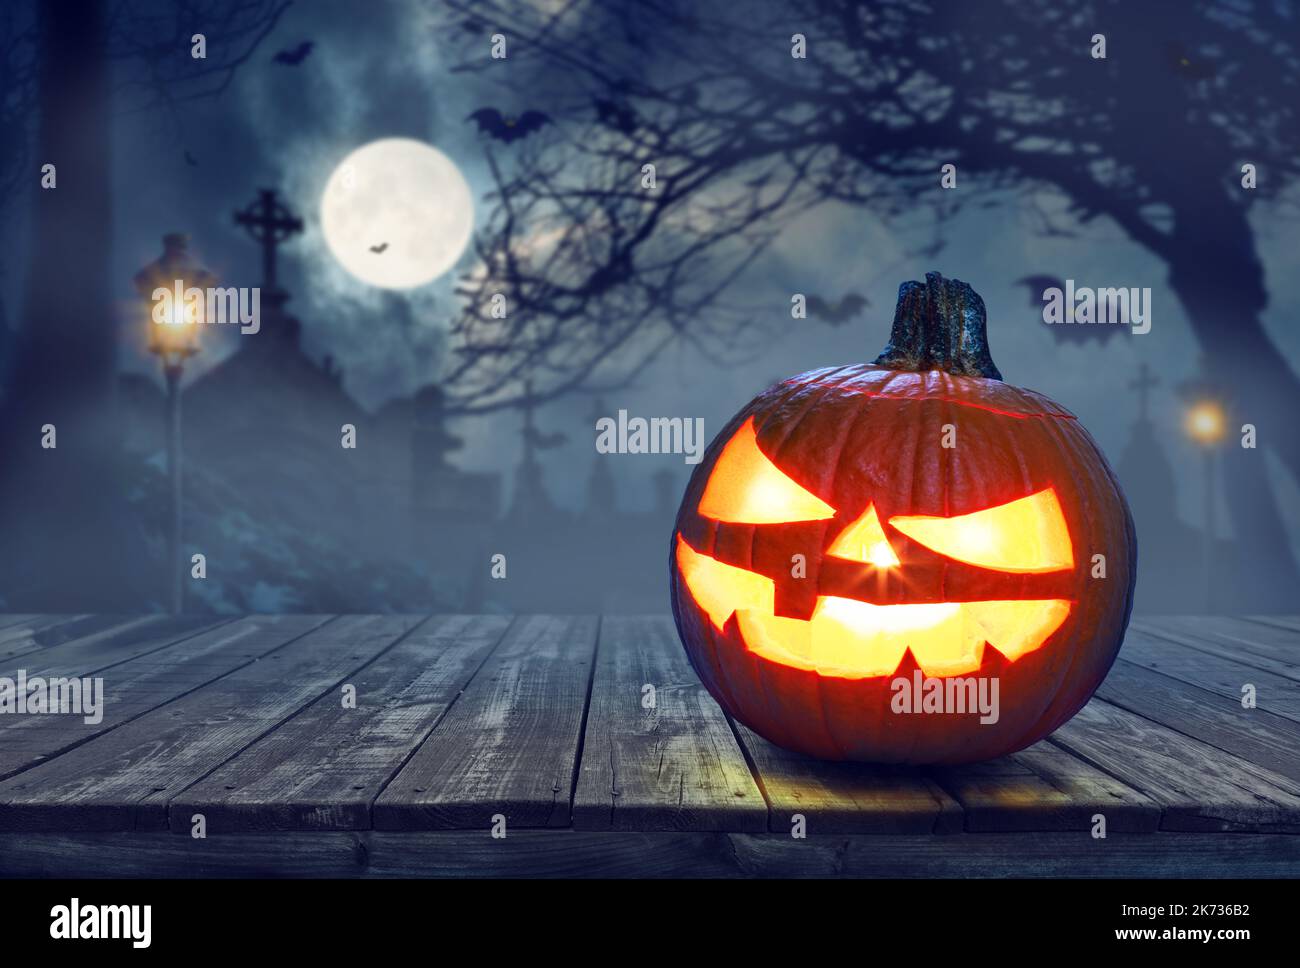 Carved lightening pumpkin for Halloween jack-o'-lanterns with scary smiles to ward of evil spirits on mystery night cemetery background. Halloween bac Stock Photo